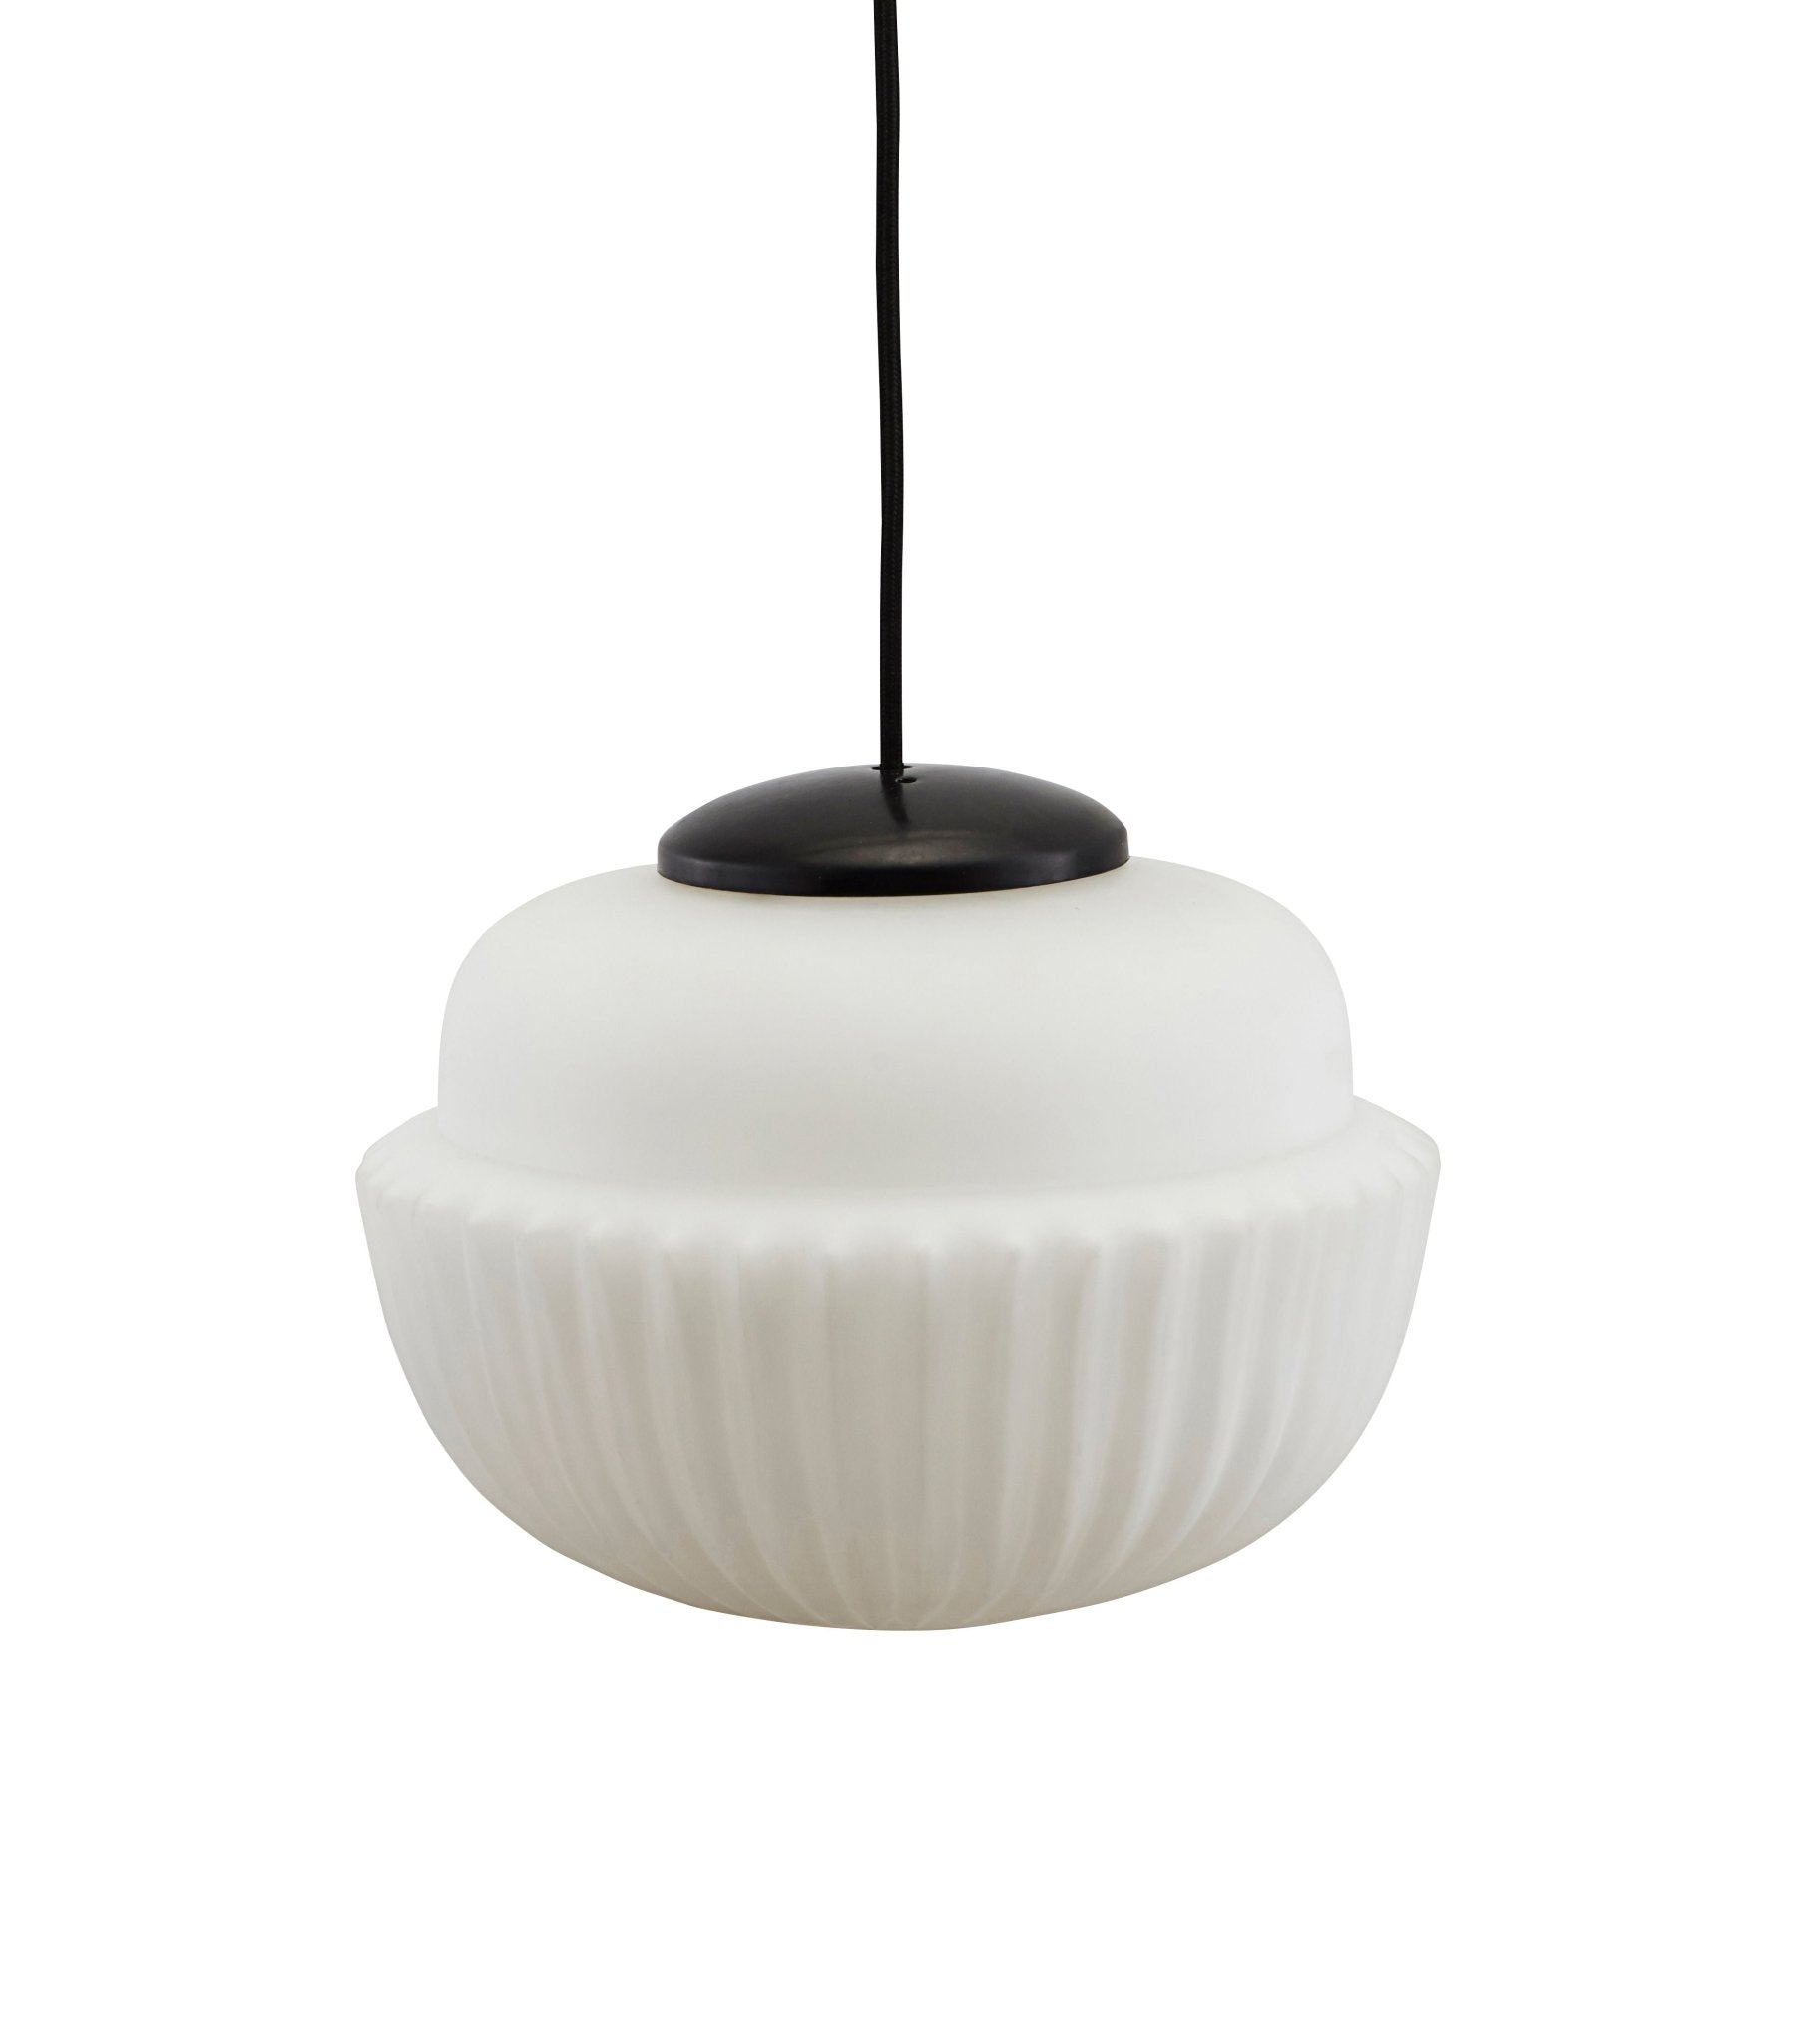 Lamp - Acorn Large - White Lamp by House Doctor